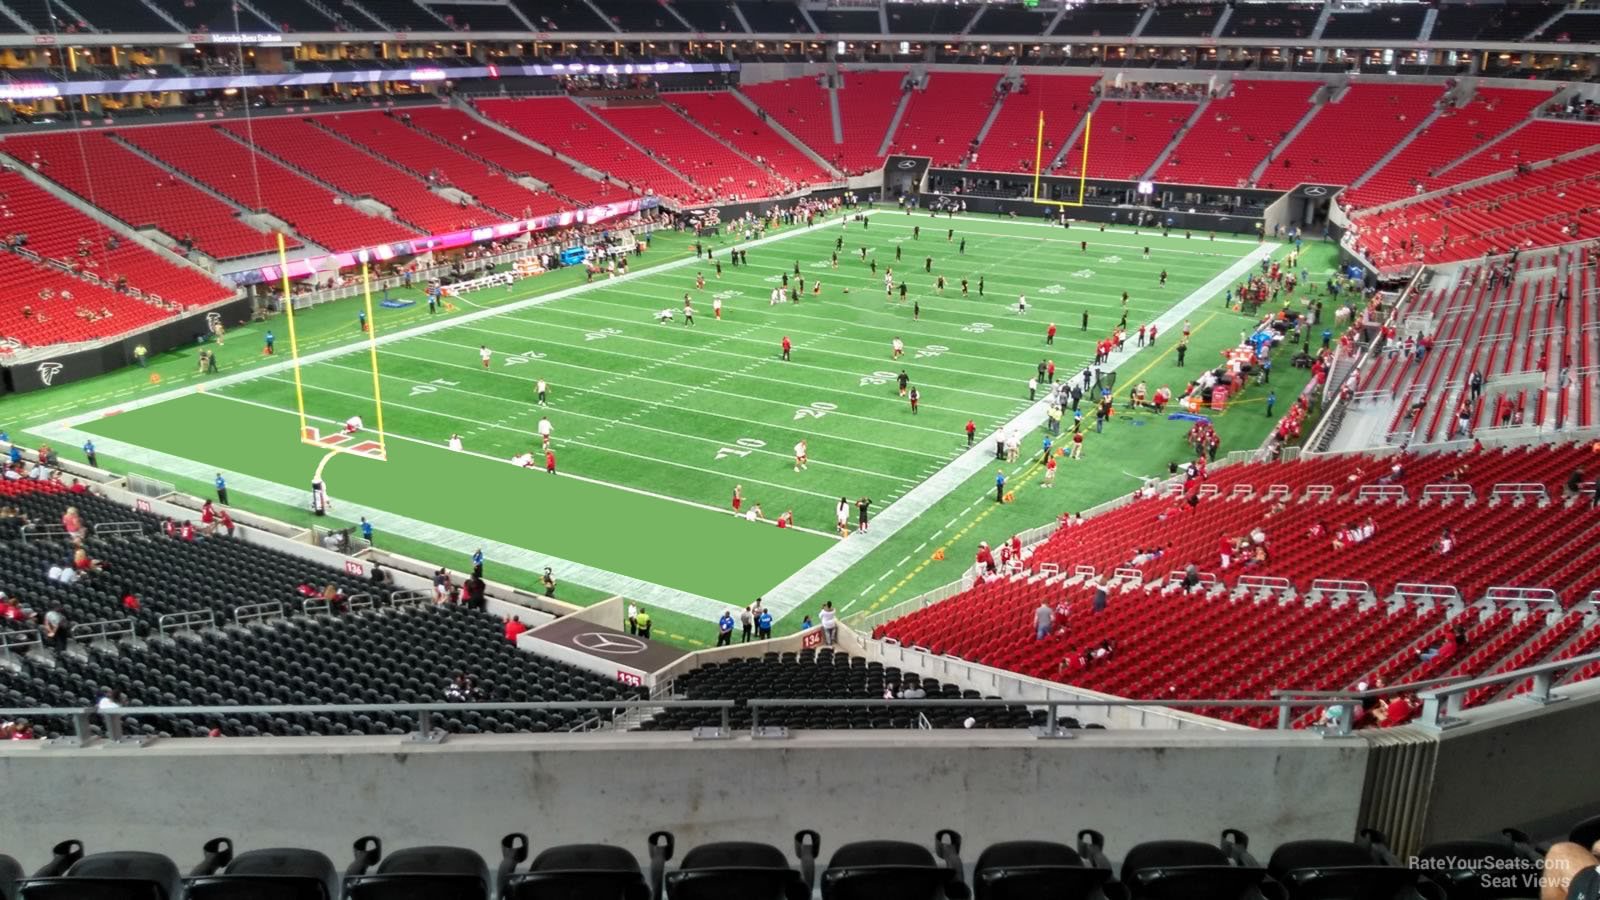 section 246, row 6 seat view  for football - mercedes-benz stadium